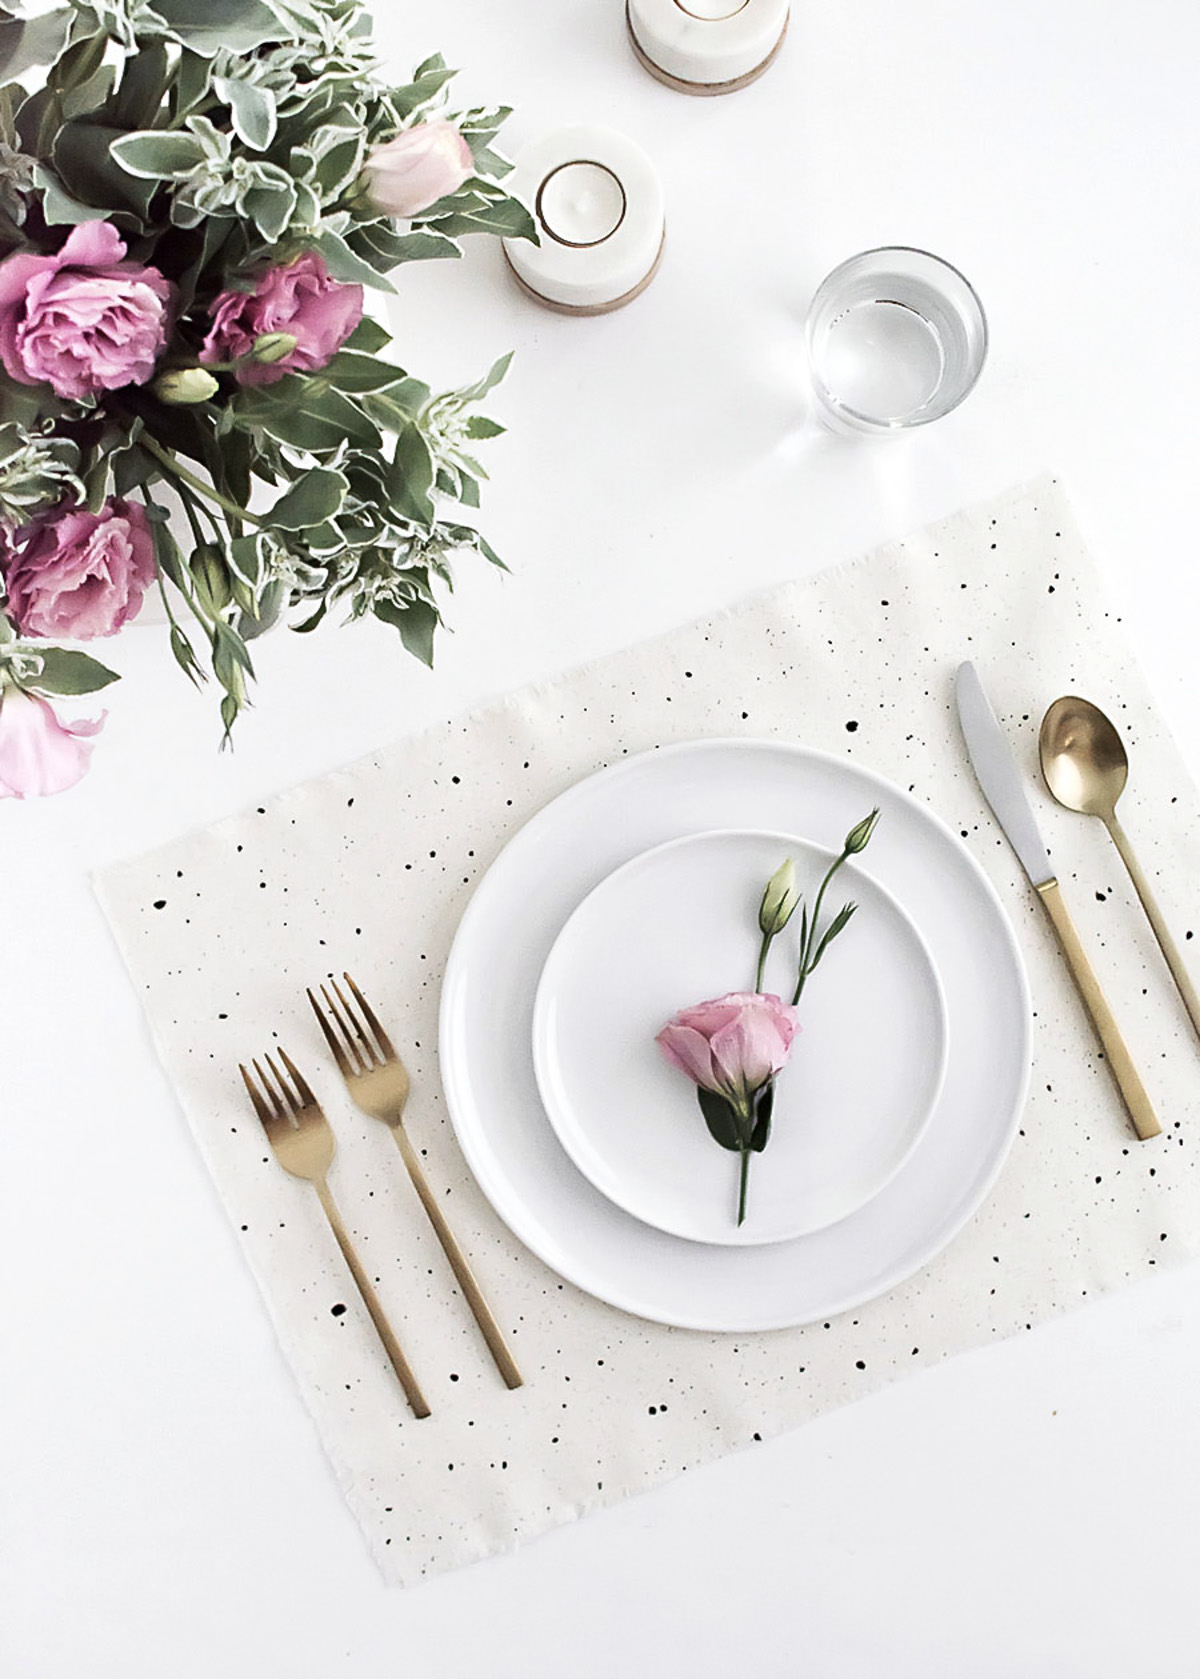 DIY simple black and white speckled placemats